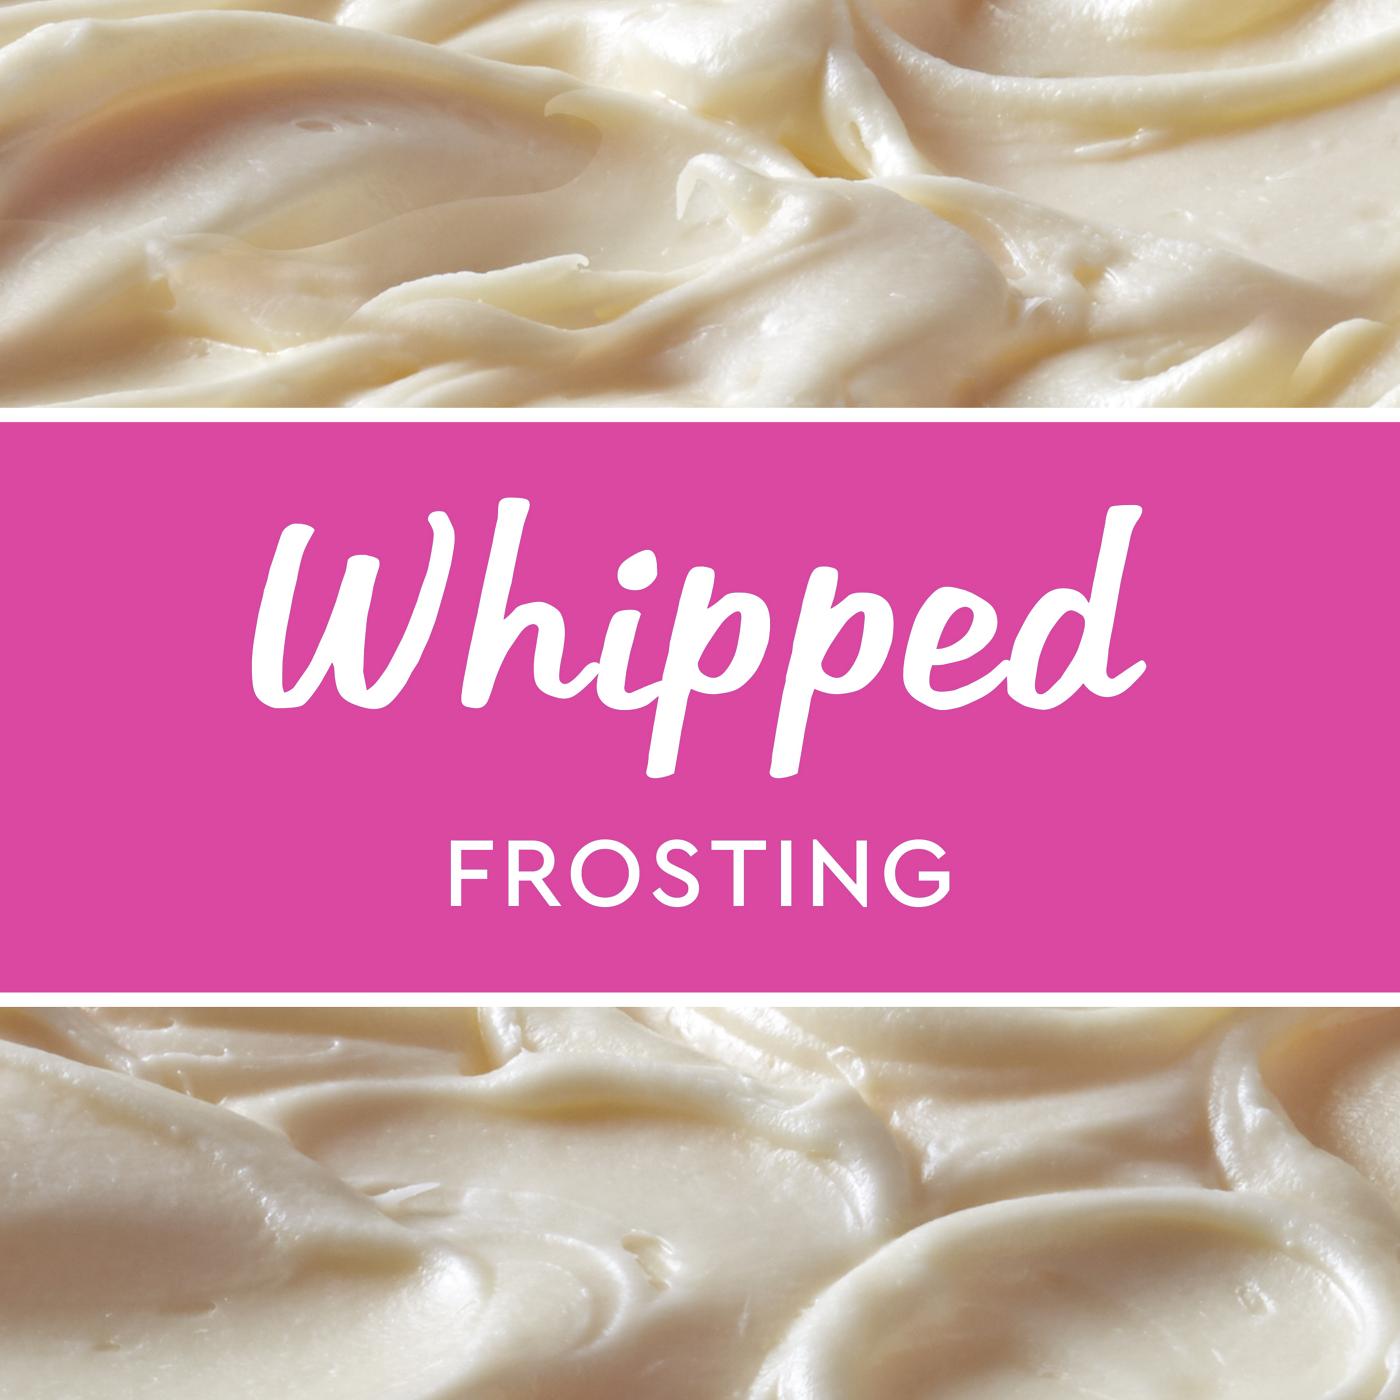 Duncan Hines Whipped Cream Cheese Frosting; image 5 of 8